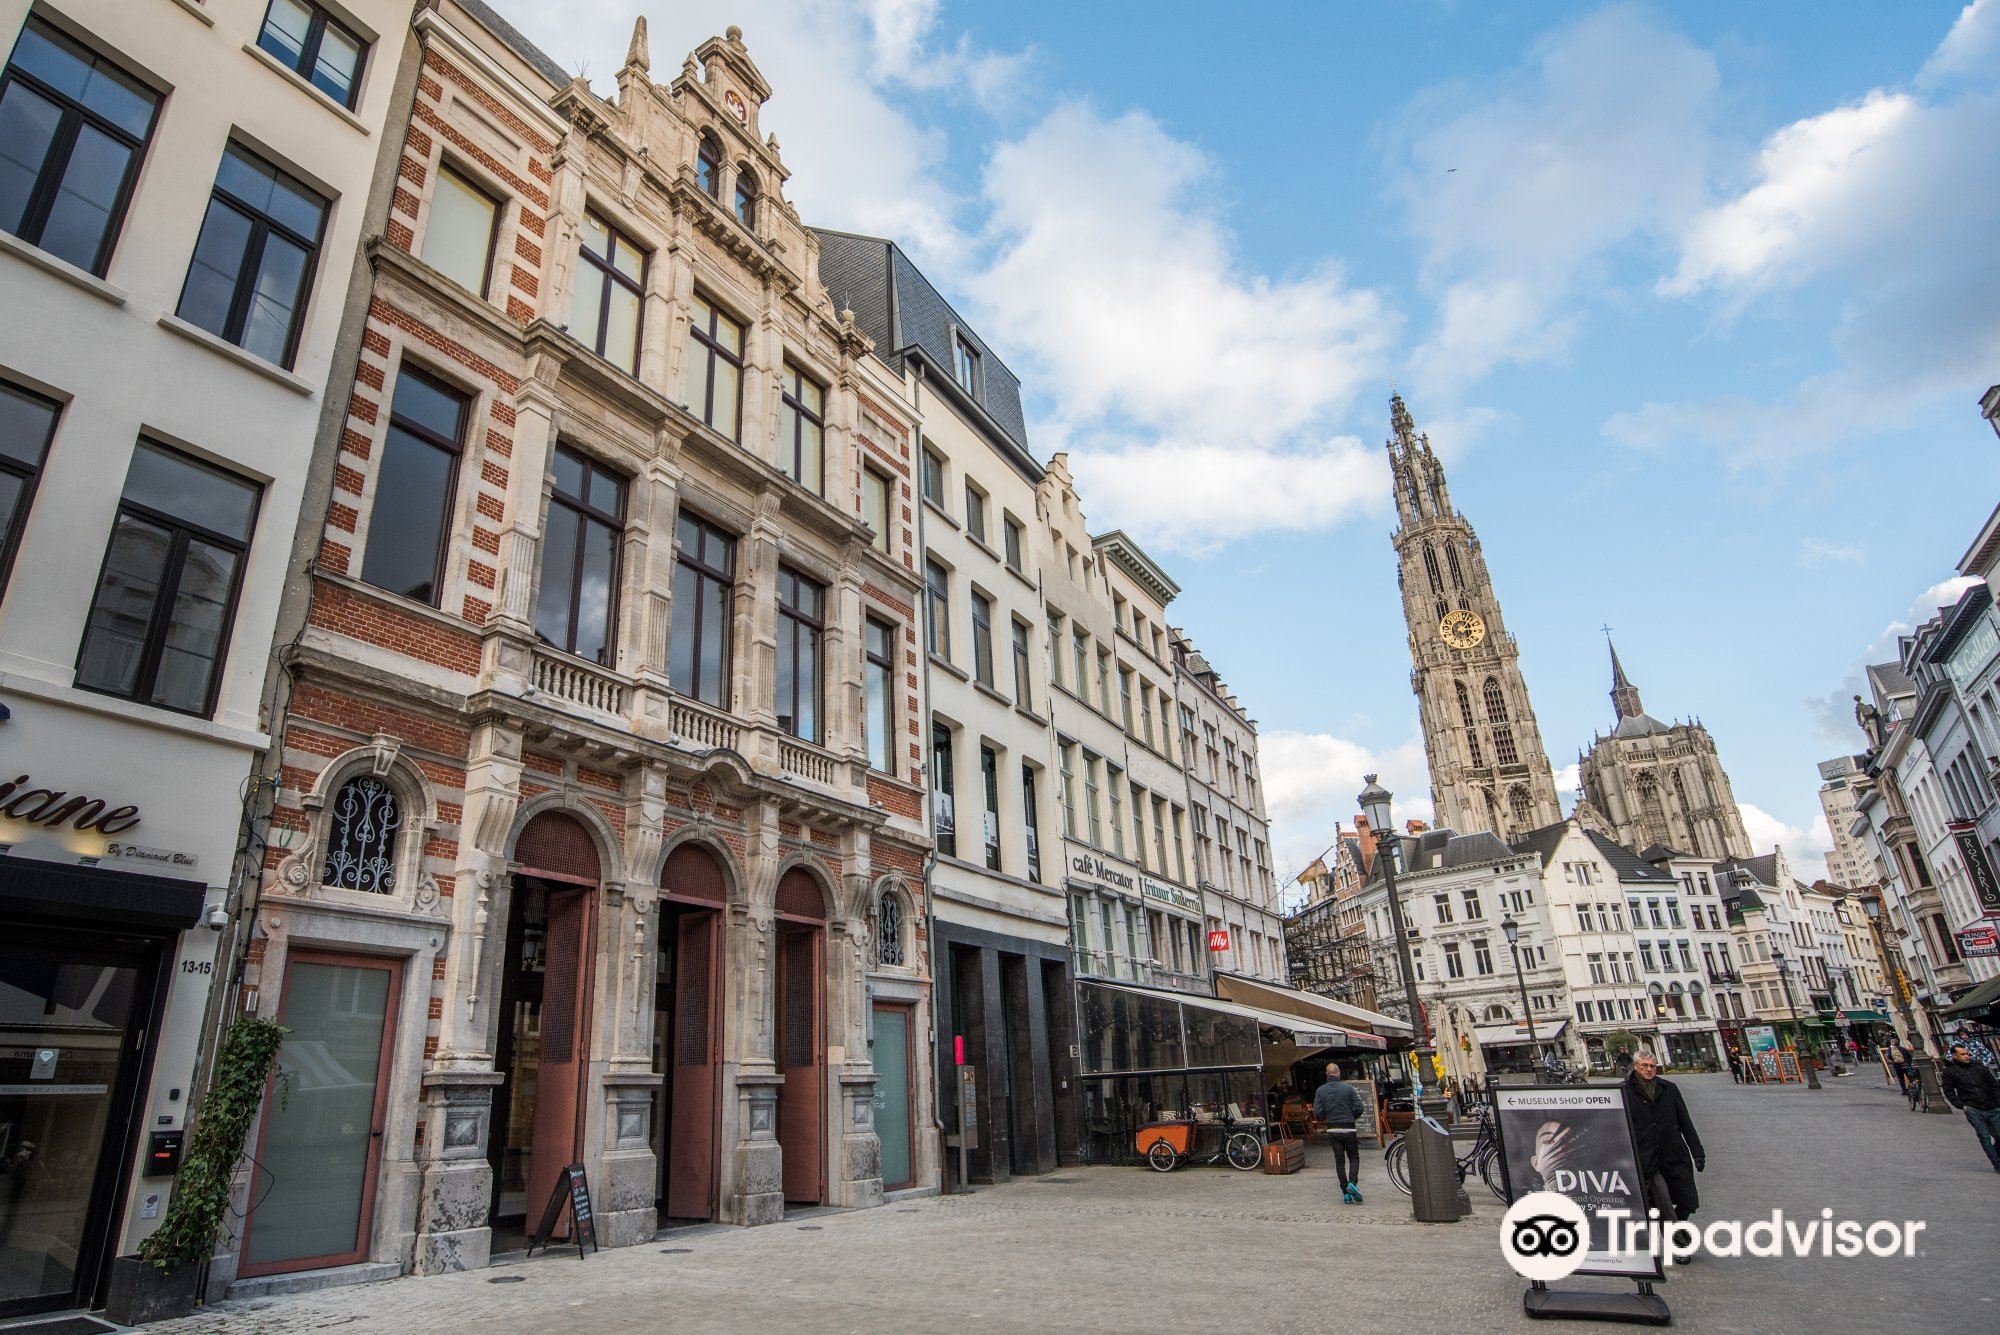 DIVA travel guidebook visit attractions Antwerp – DIVA nearby recommendation Trip.com